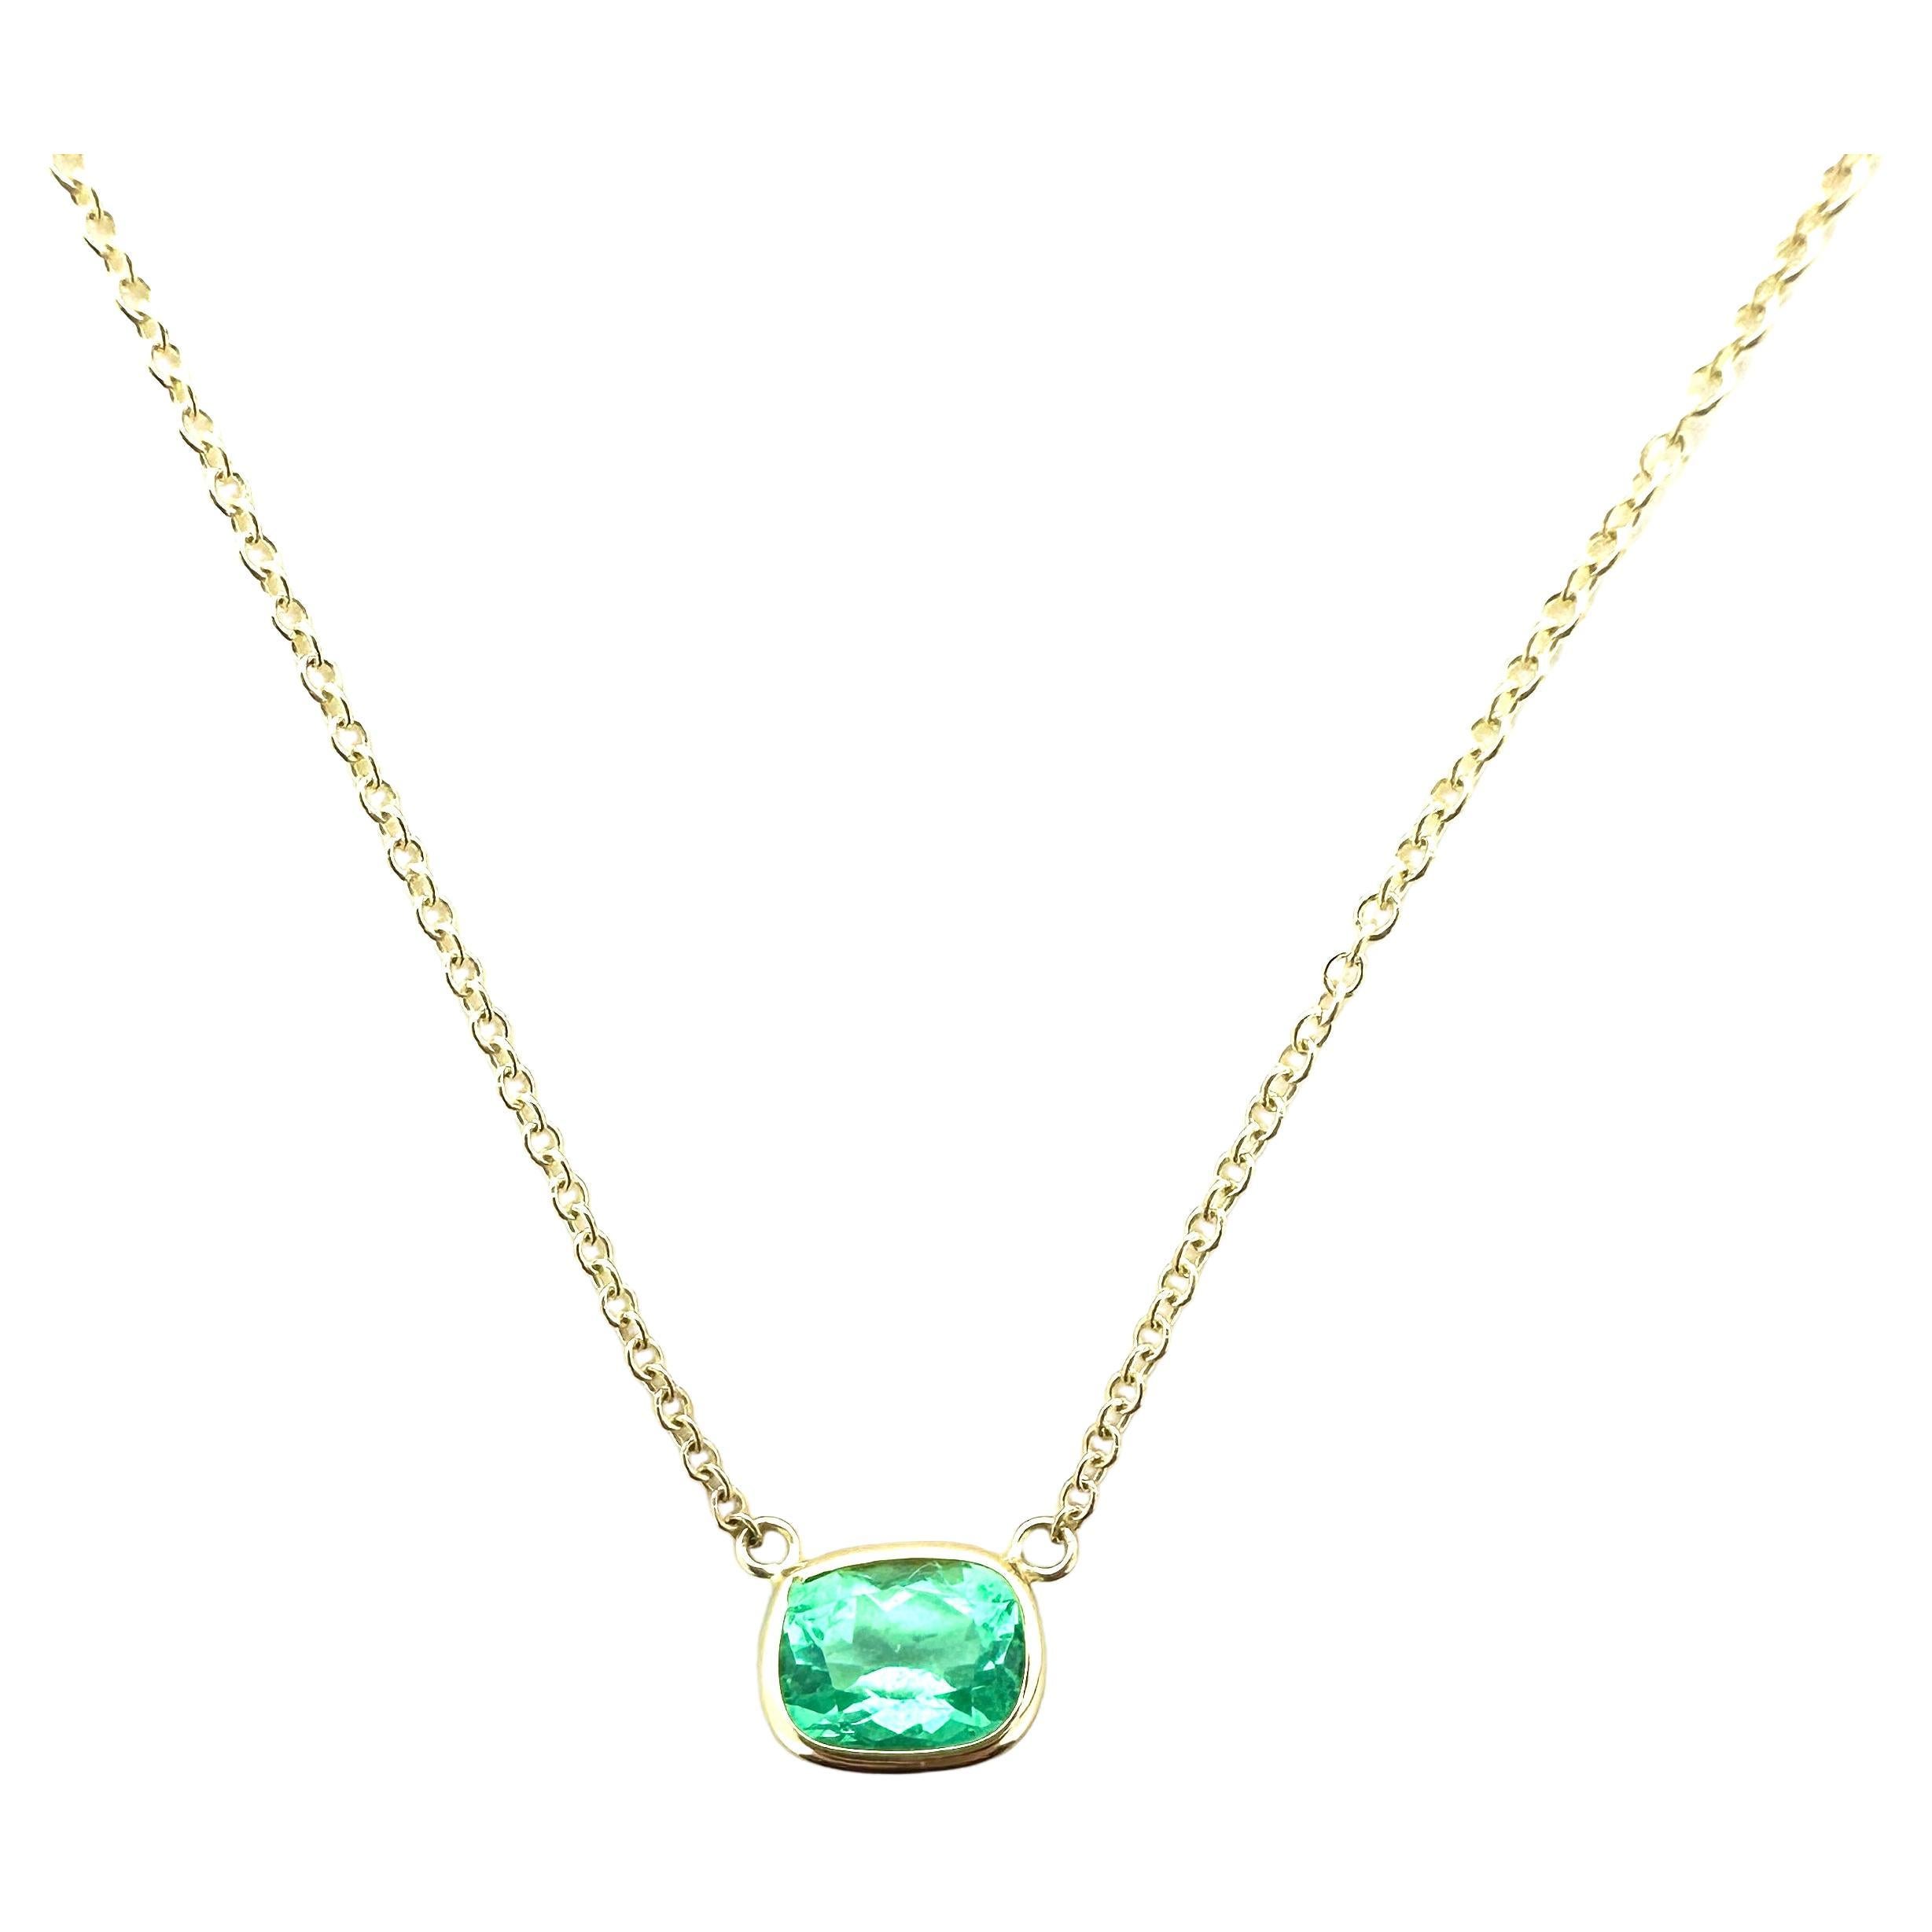 1.41 Carat Weight Green Emerald Long Cushion Cut Solitaire Necklace in 14k YG